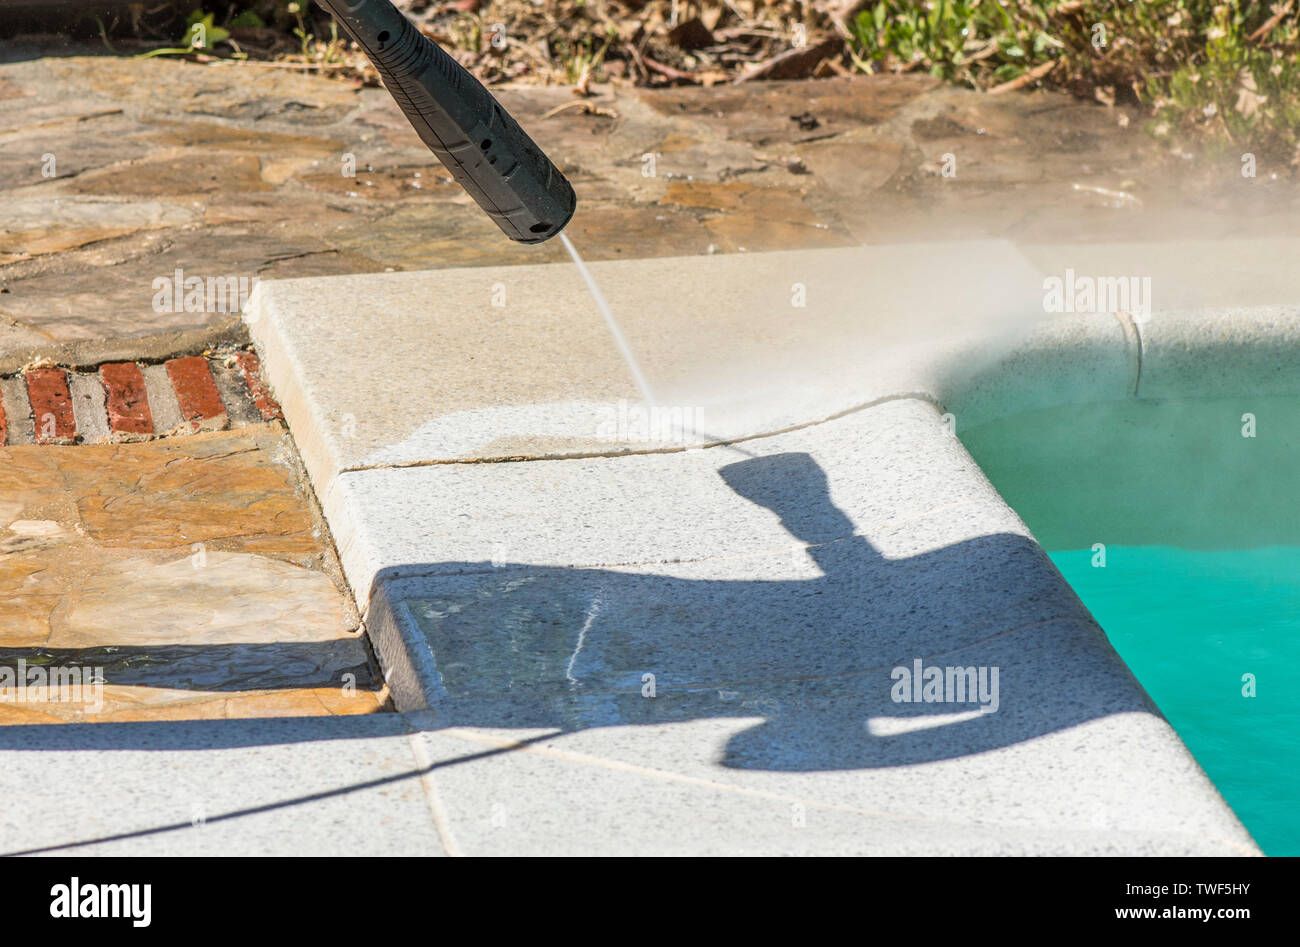 Border of a swimming pool border being cleaned with high pressure washer. Stock Photo